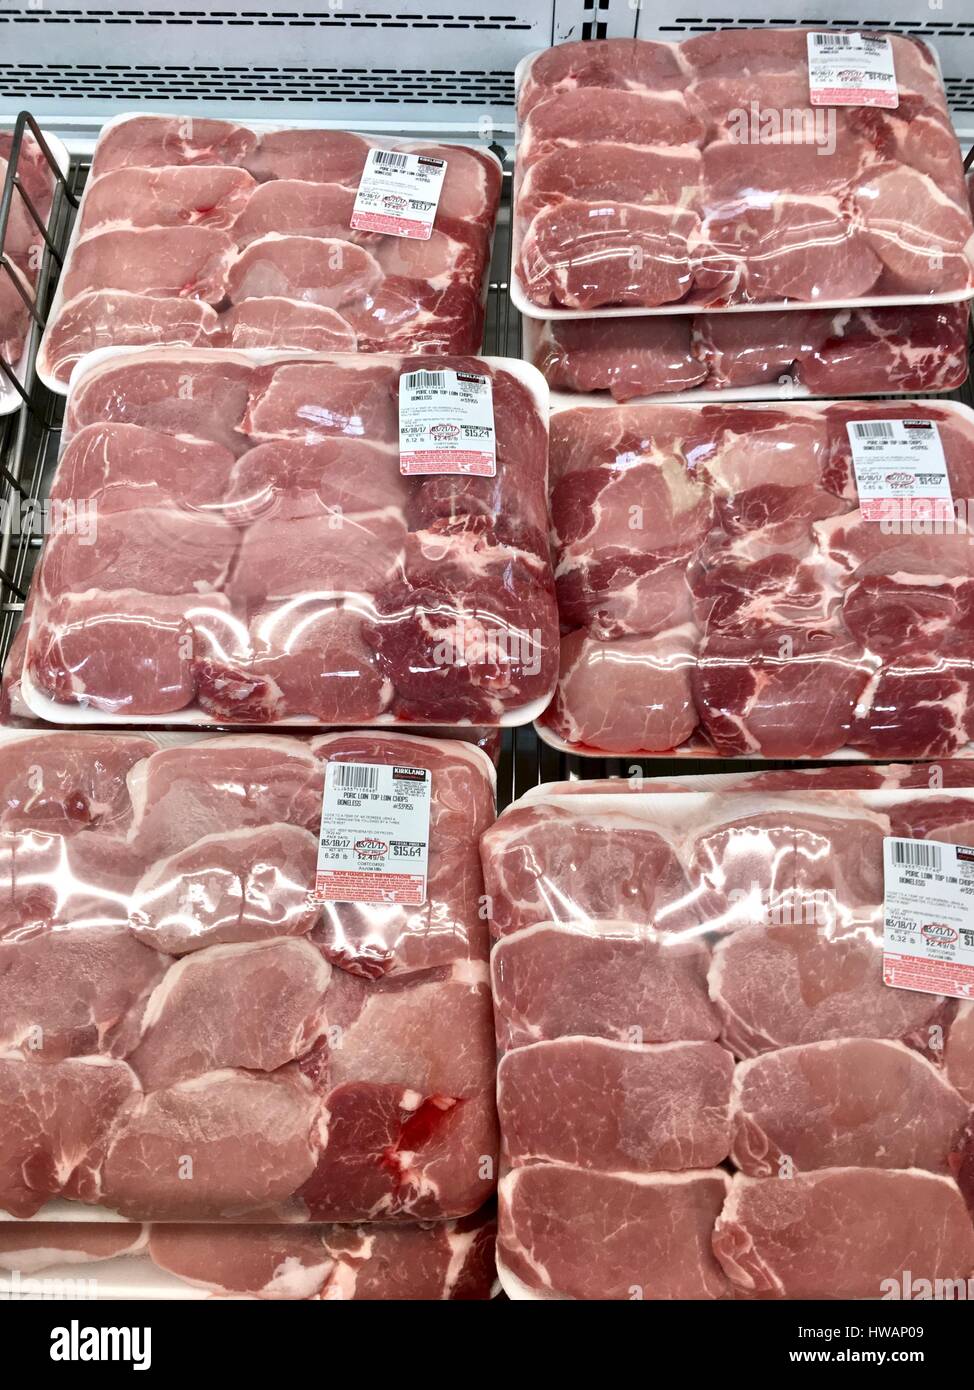 Costco fresh packed meat Stock Photo Alamy